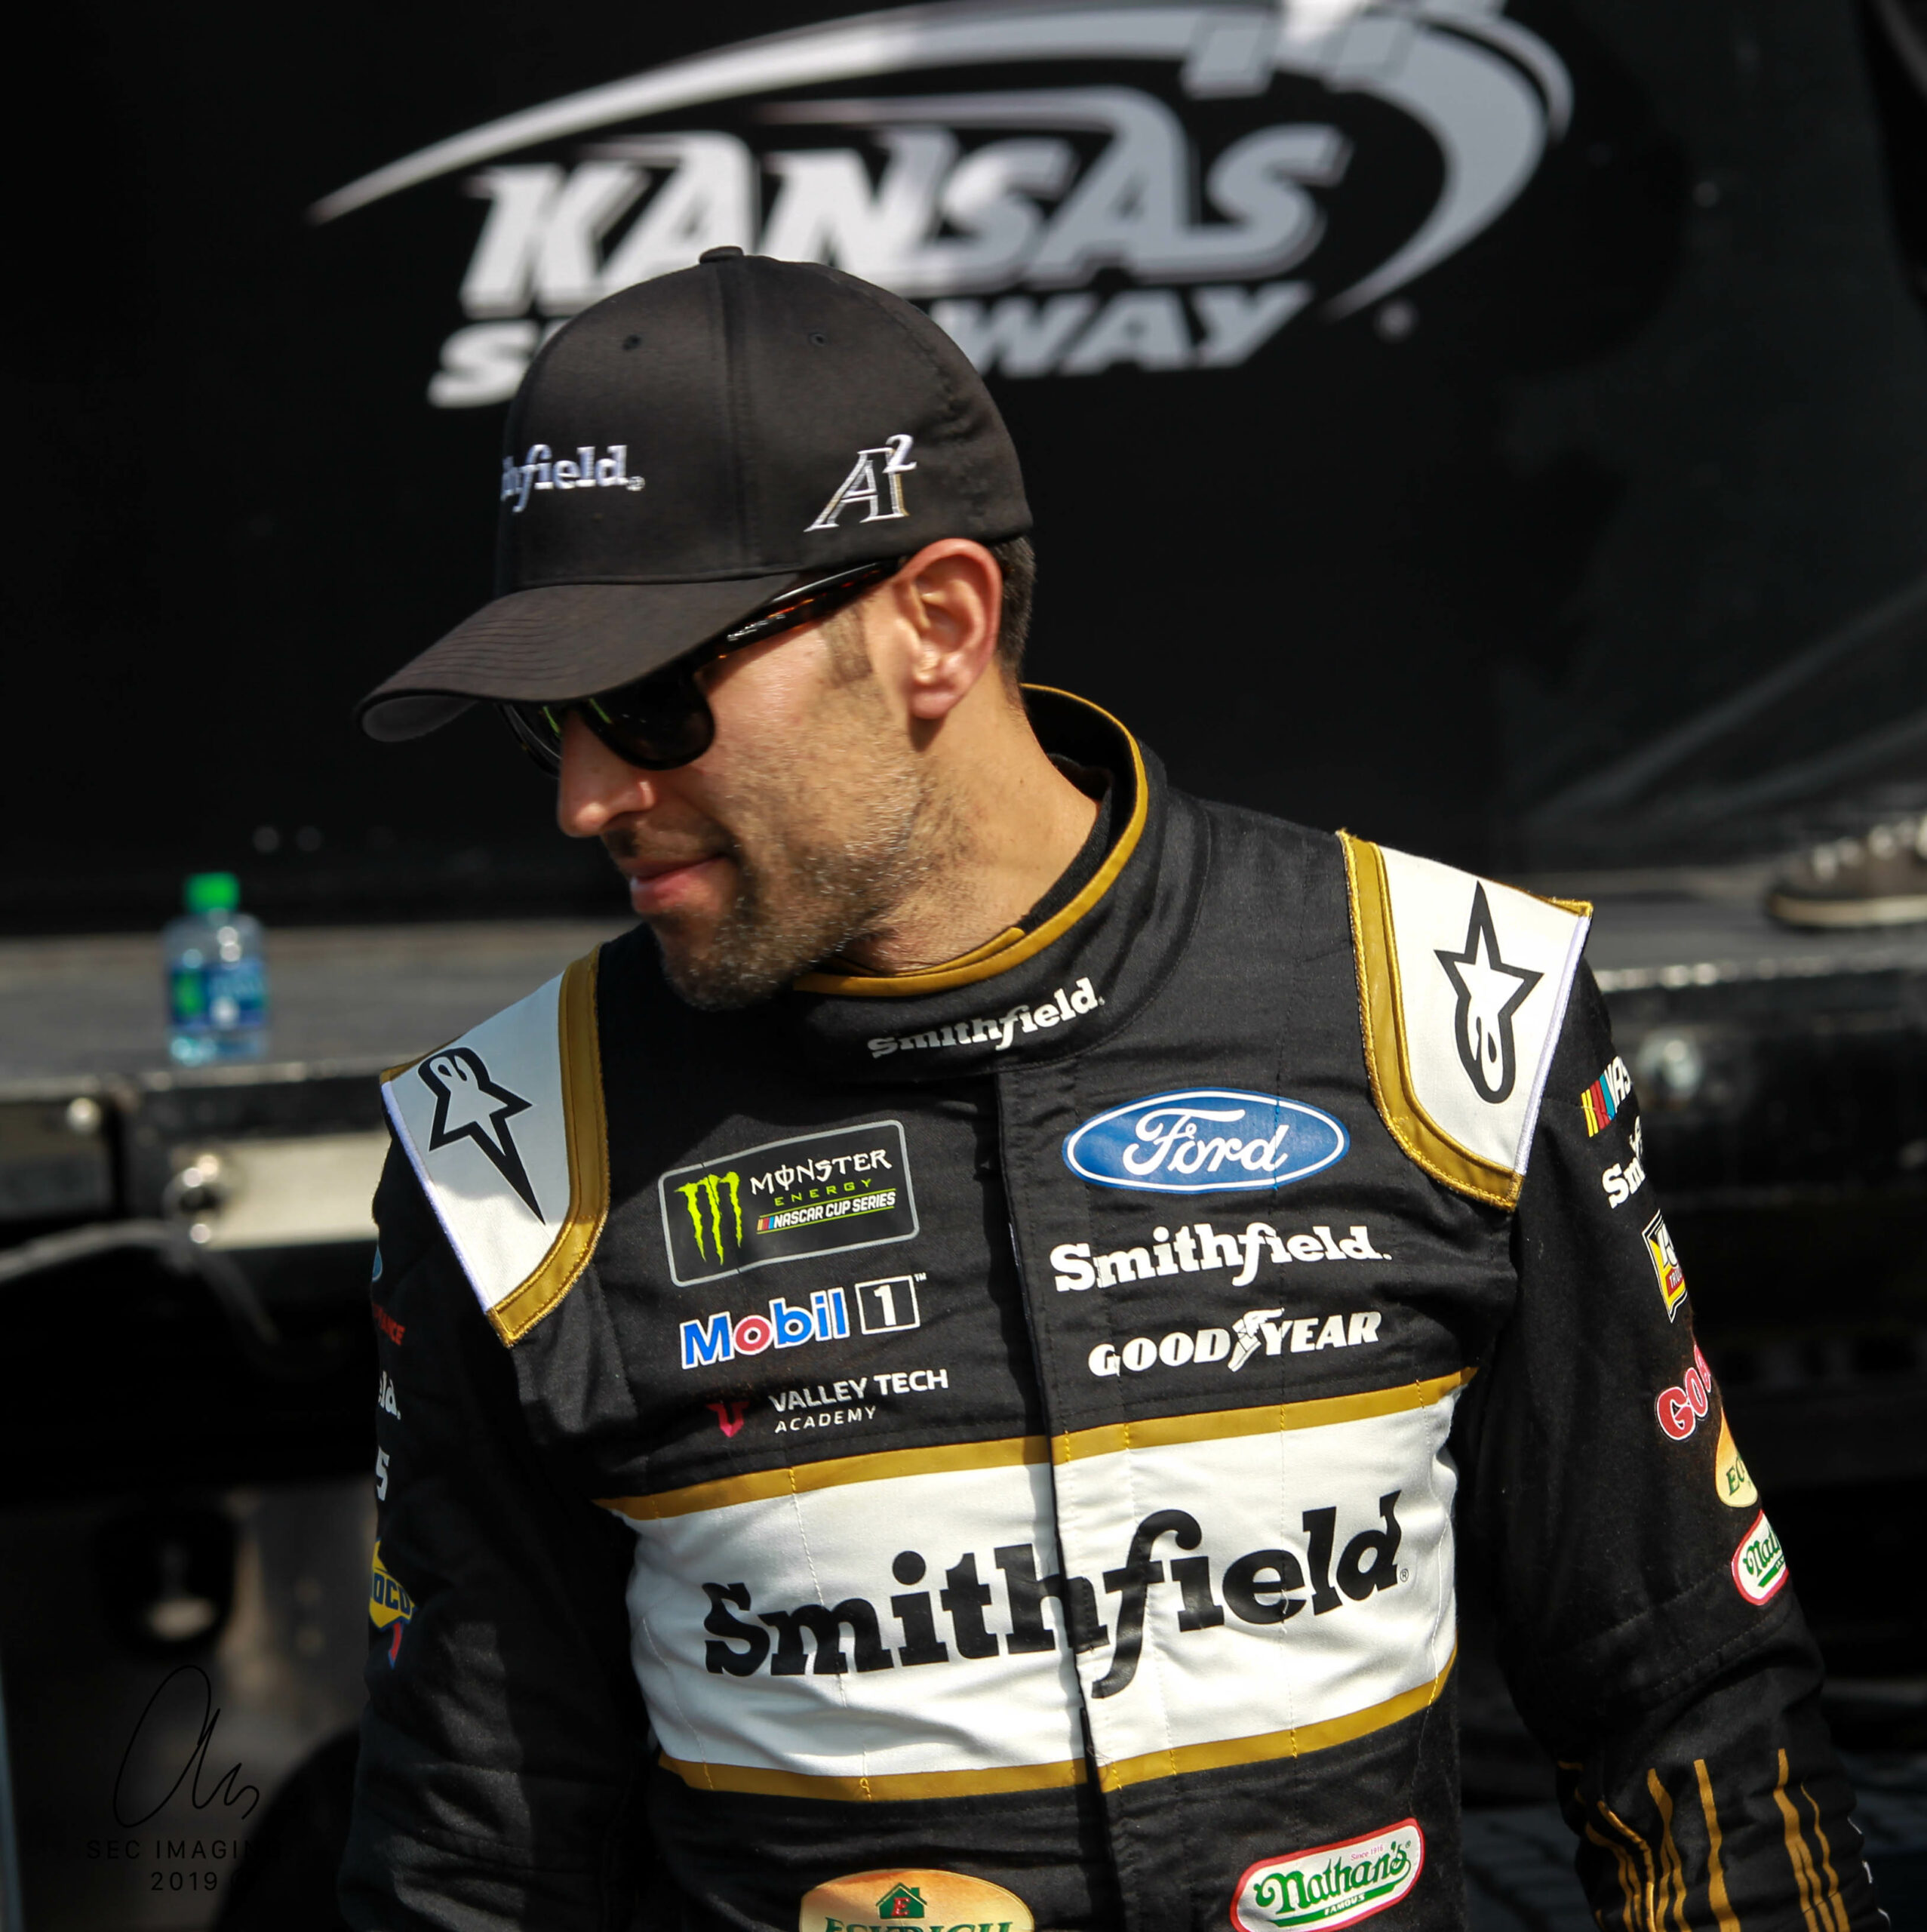 Altogether, Driver 10 desires for success with SHR. (Photo Credit: Stephen Conley/TPF)